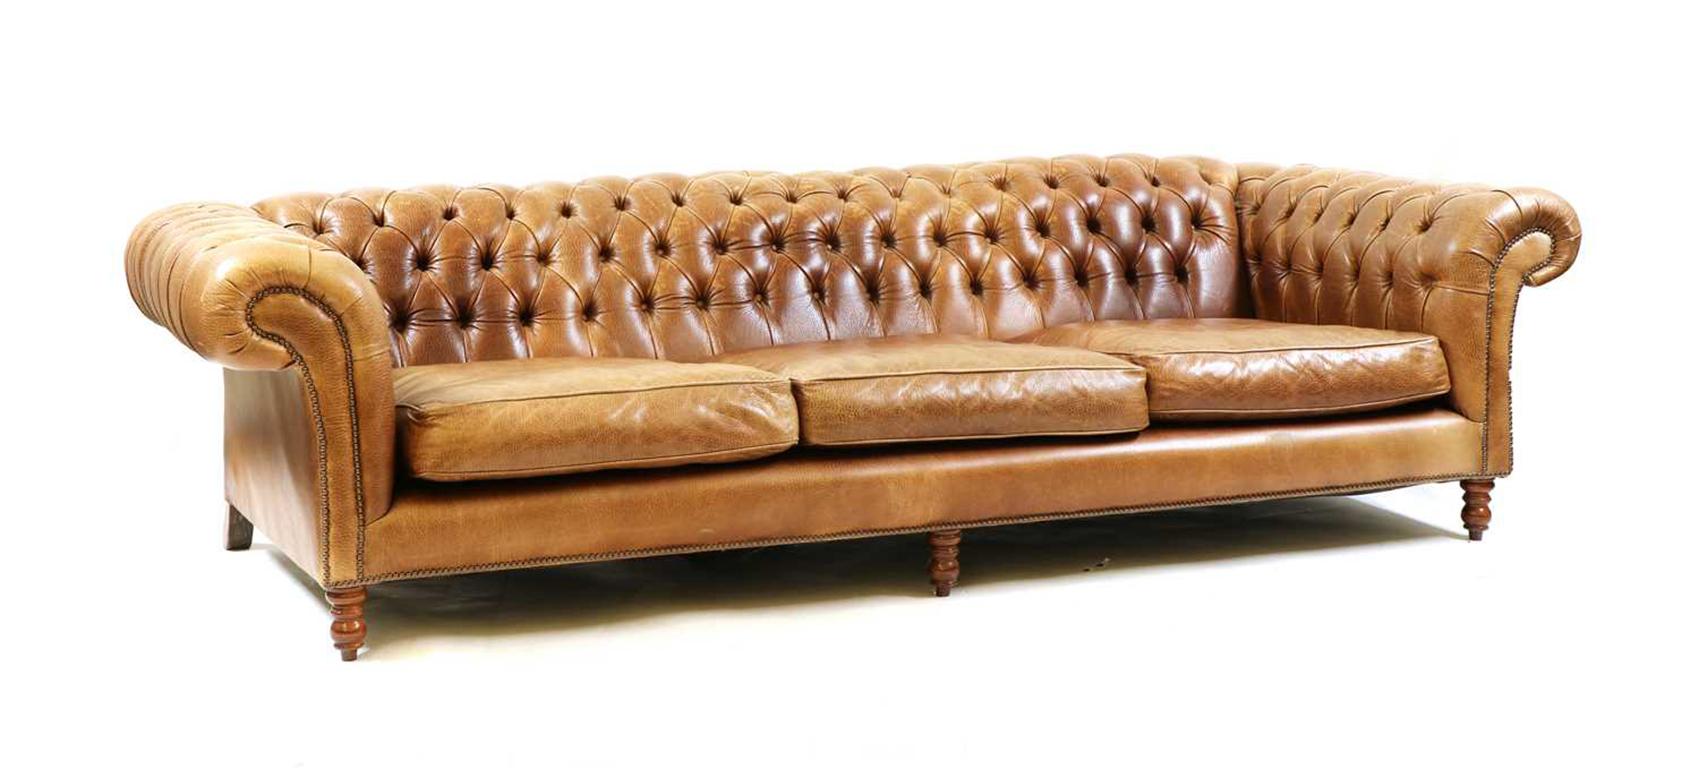 Vintage English Button Back Leather Chesterfield Sofa, Mid 20th Century 8